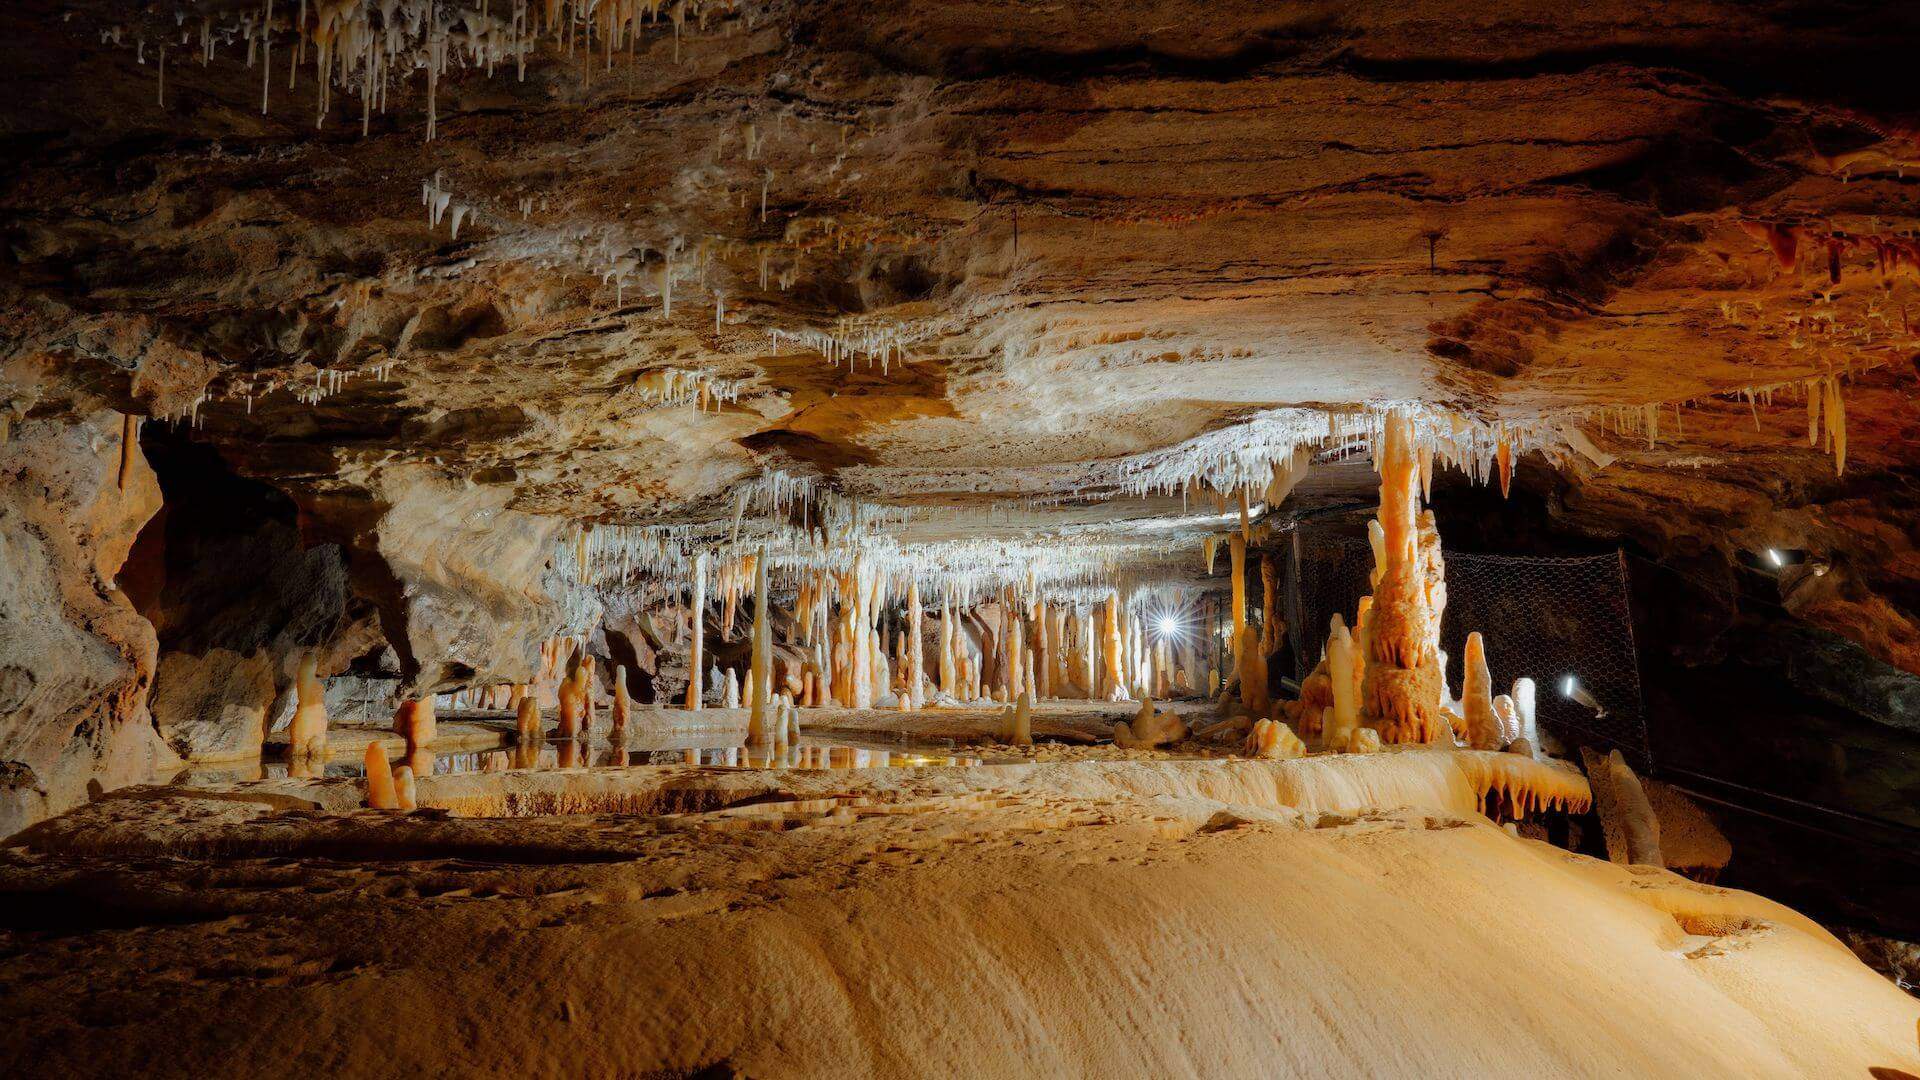 Buchan Caves - some of the best caves to visit near Melbourne